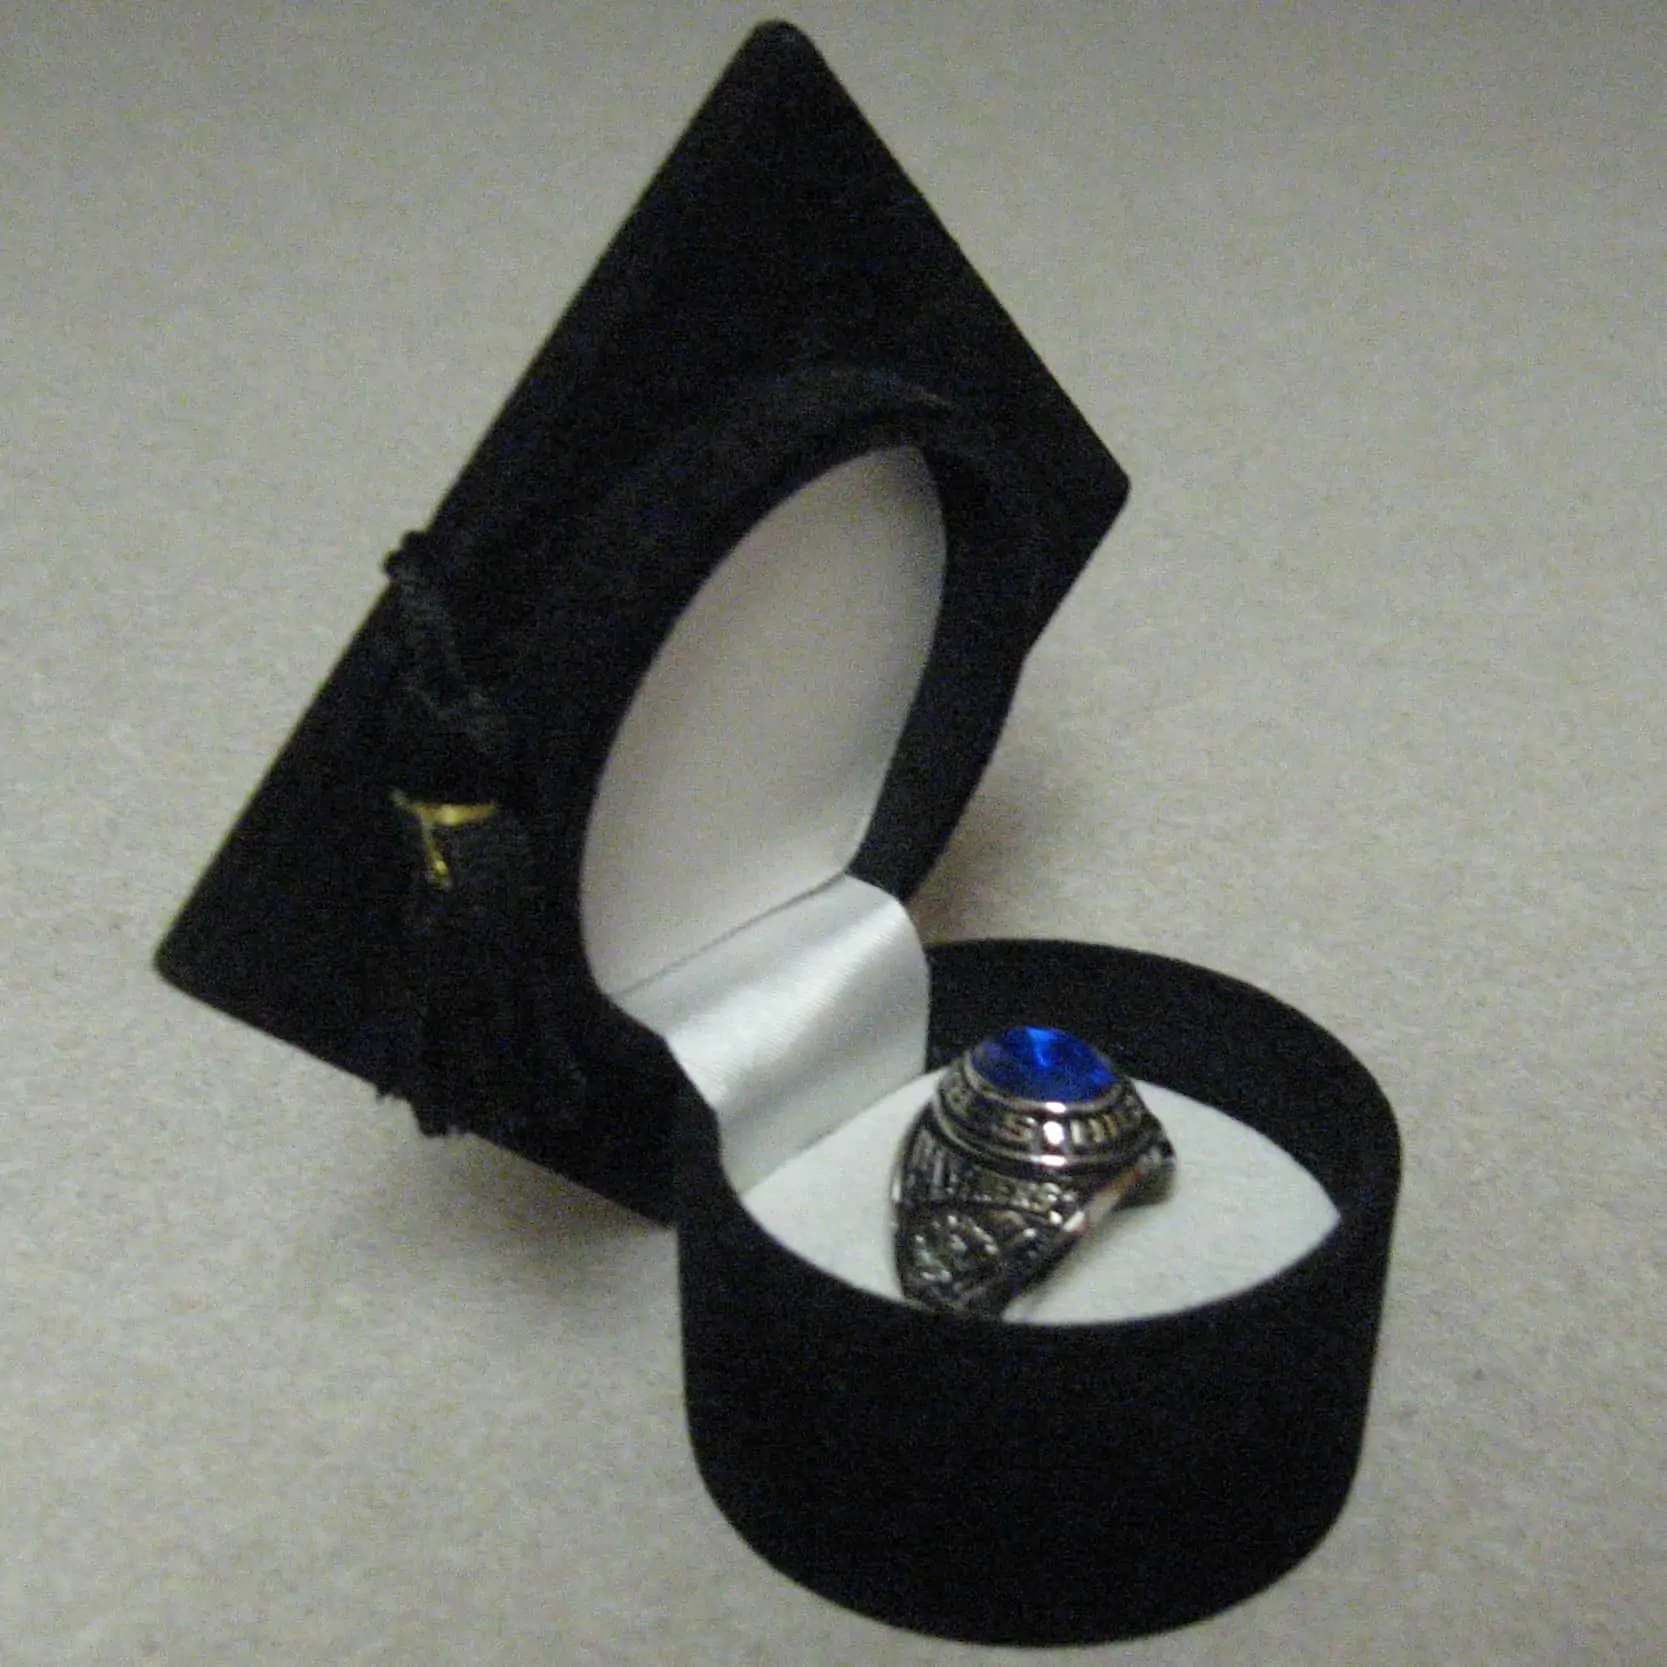 A photograph of a silver class ring with a blue stone